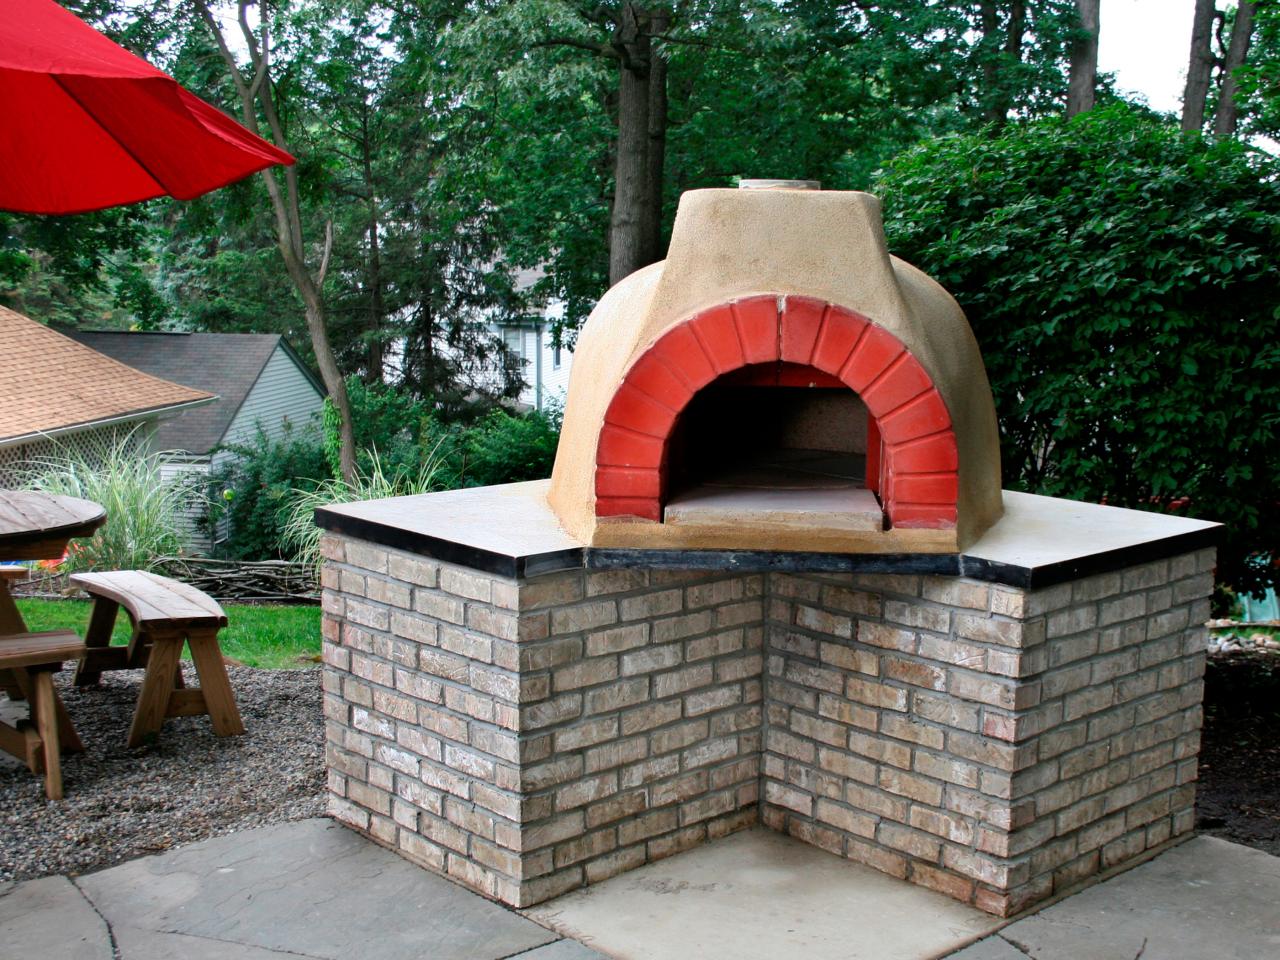 How To Build An Outdoor Pizza Oven, Outdoor Brick Oven Pizza Maker